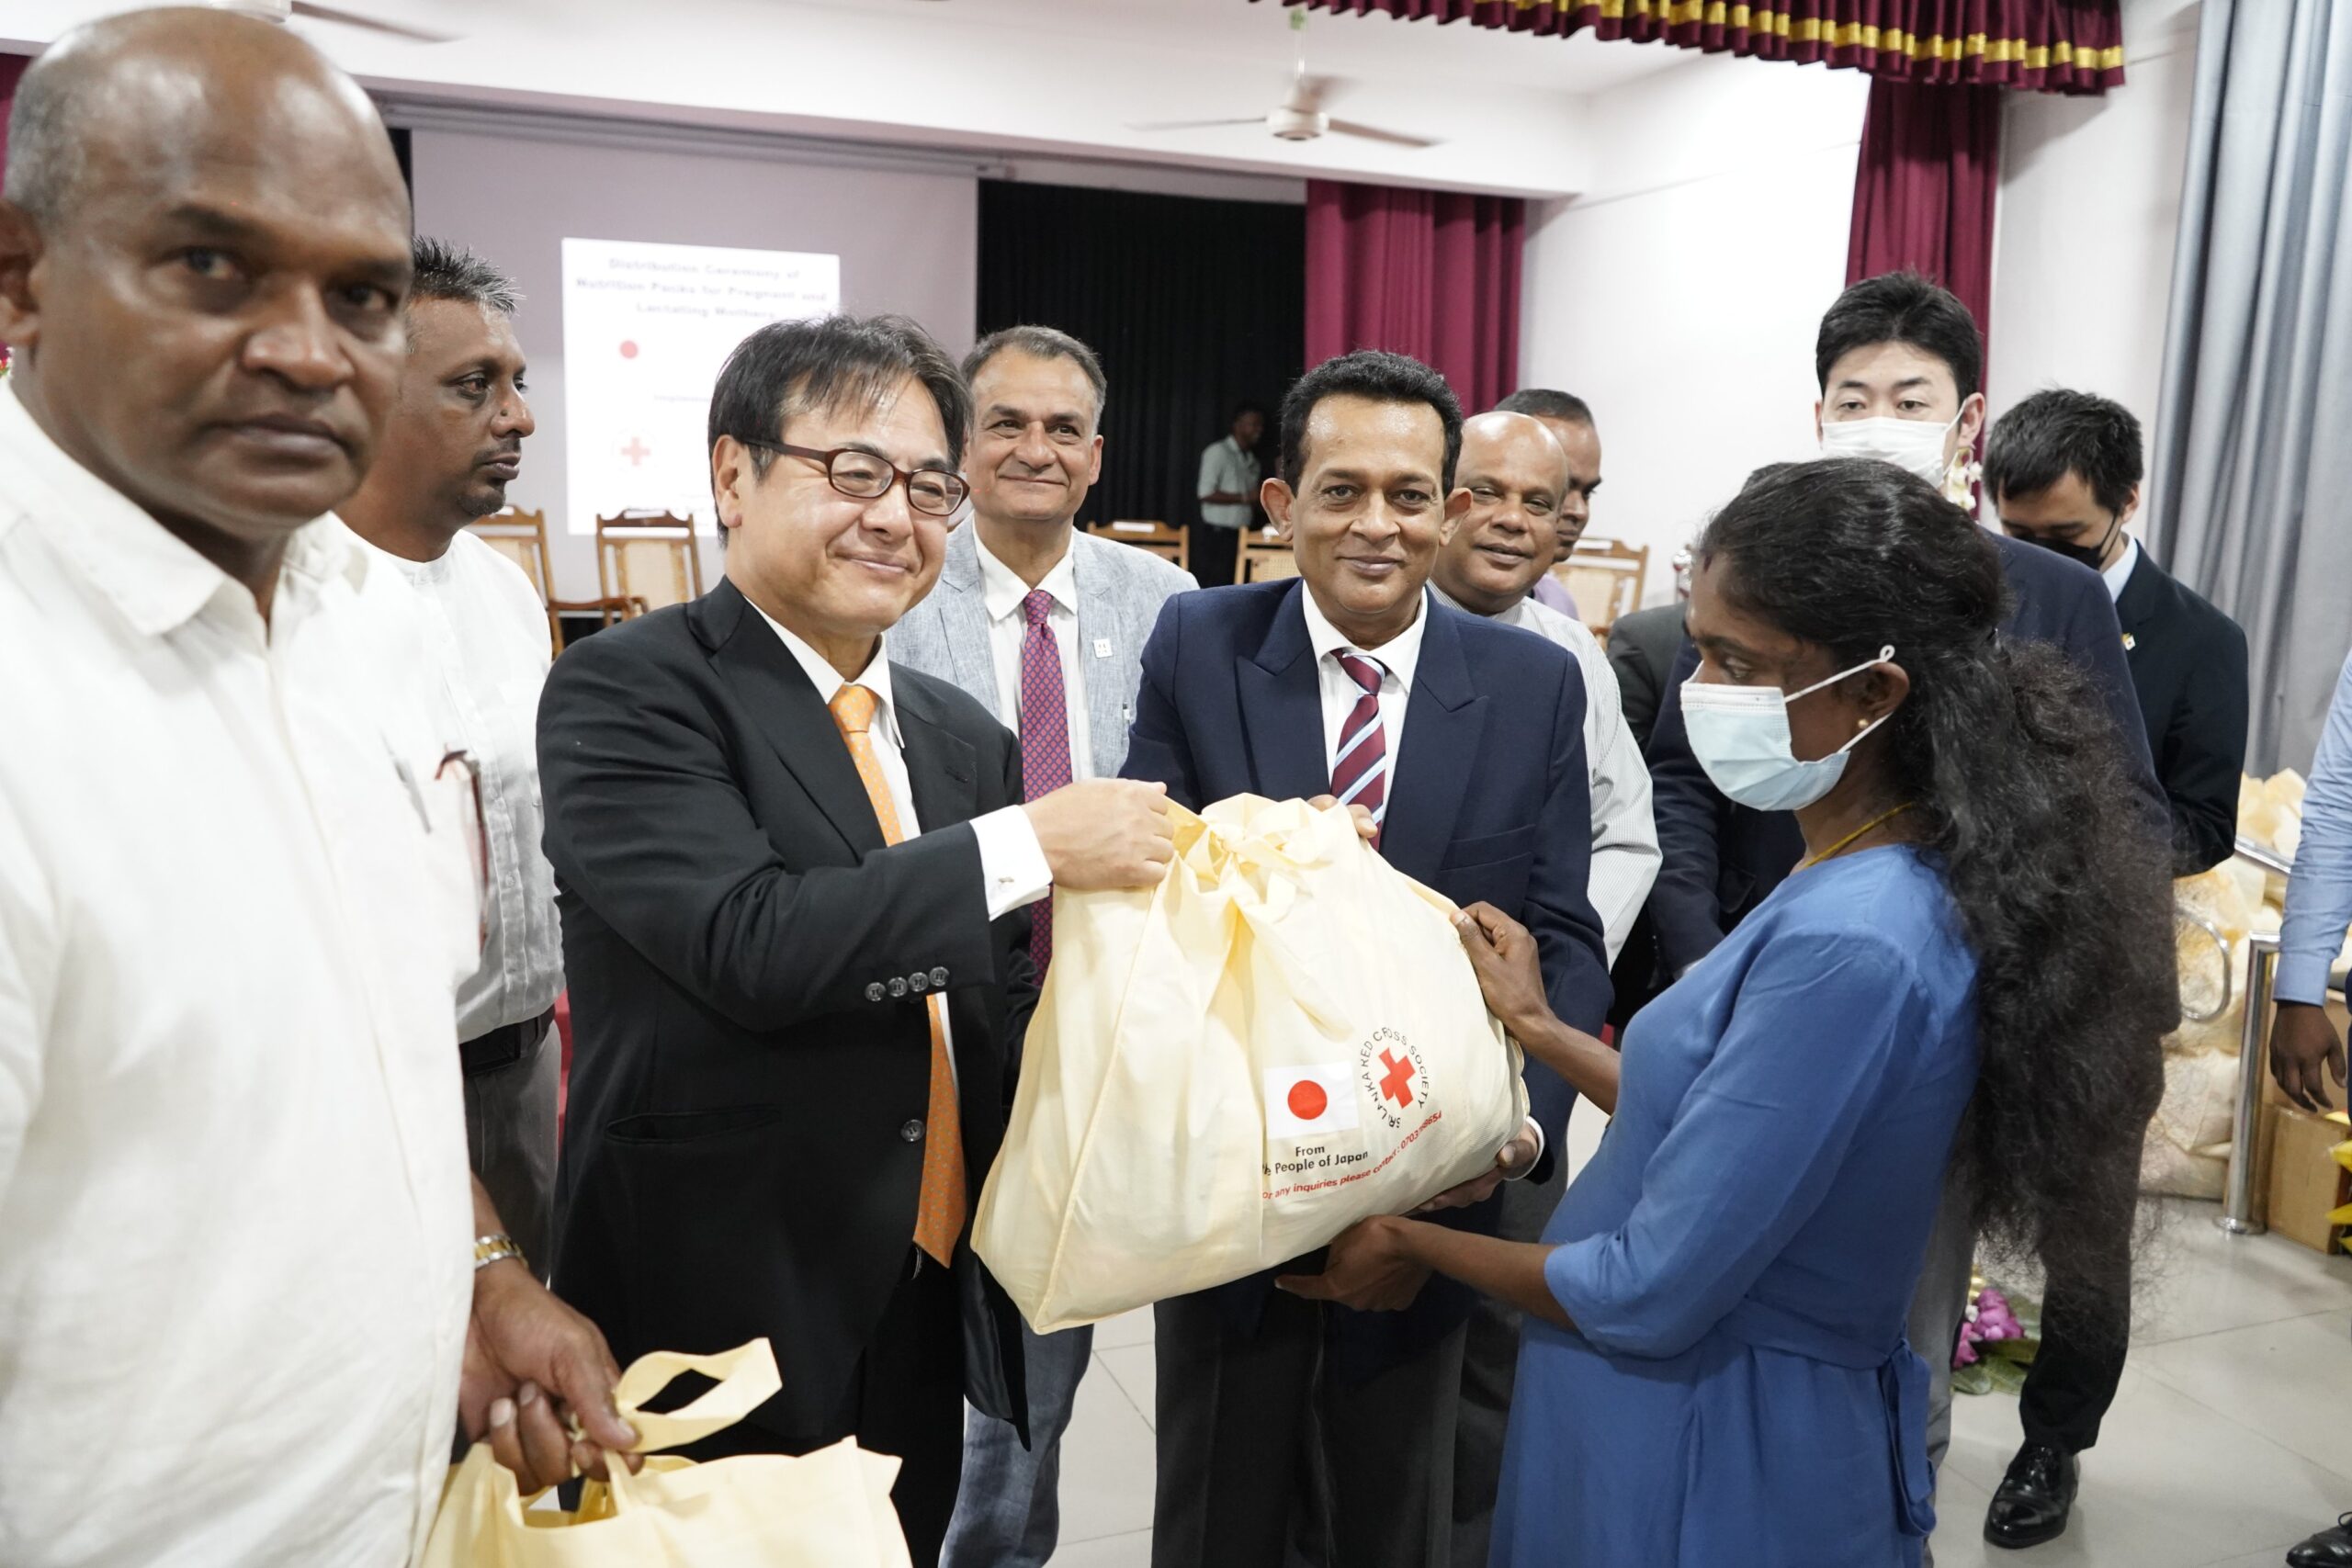 Japan donated $1 million to IFRC for support the nutritional needs of low-income families